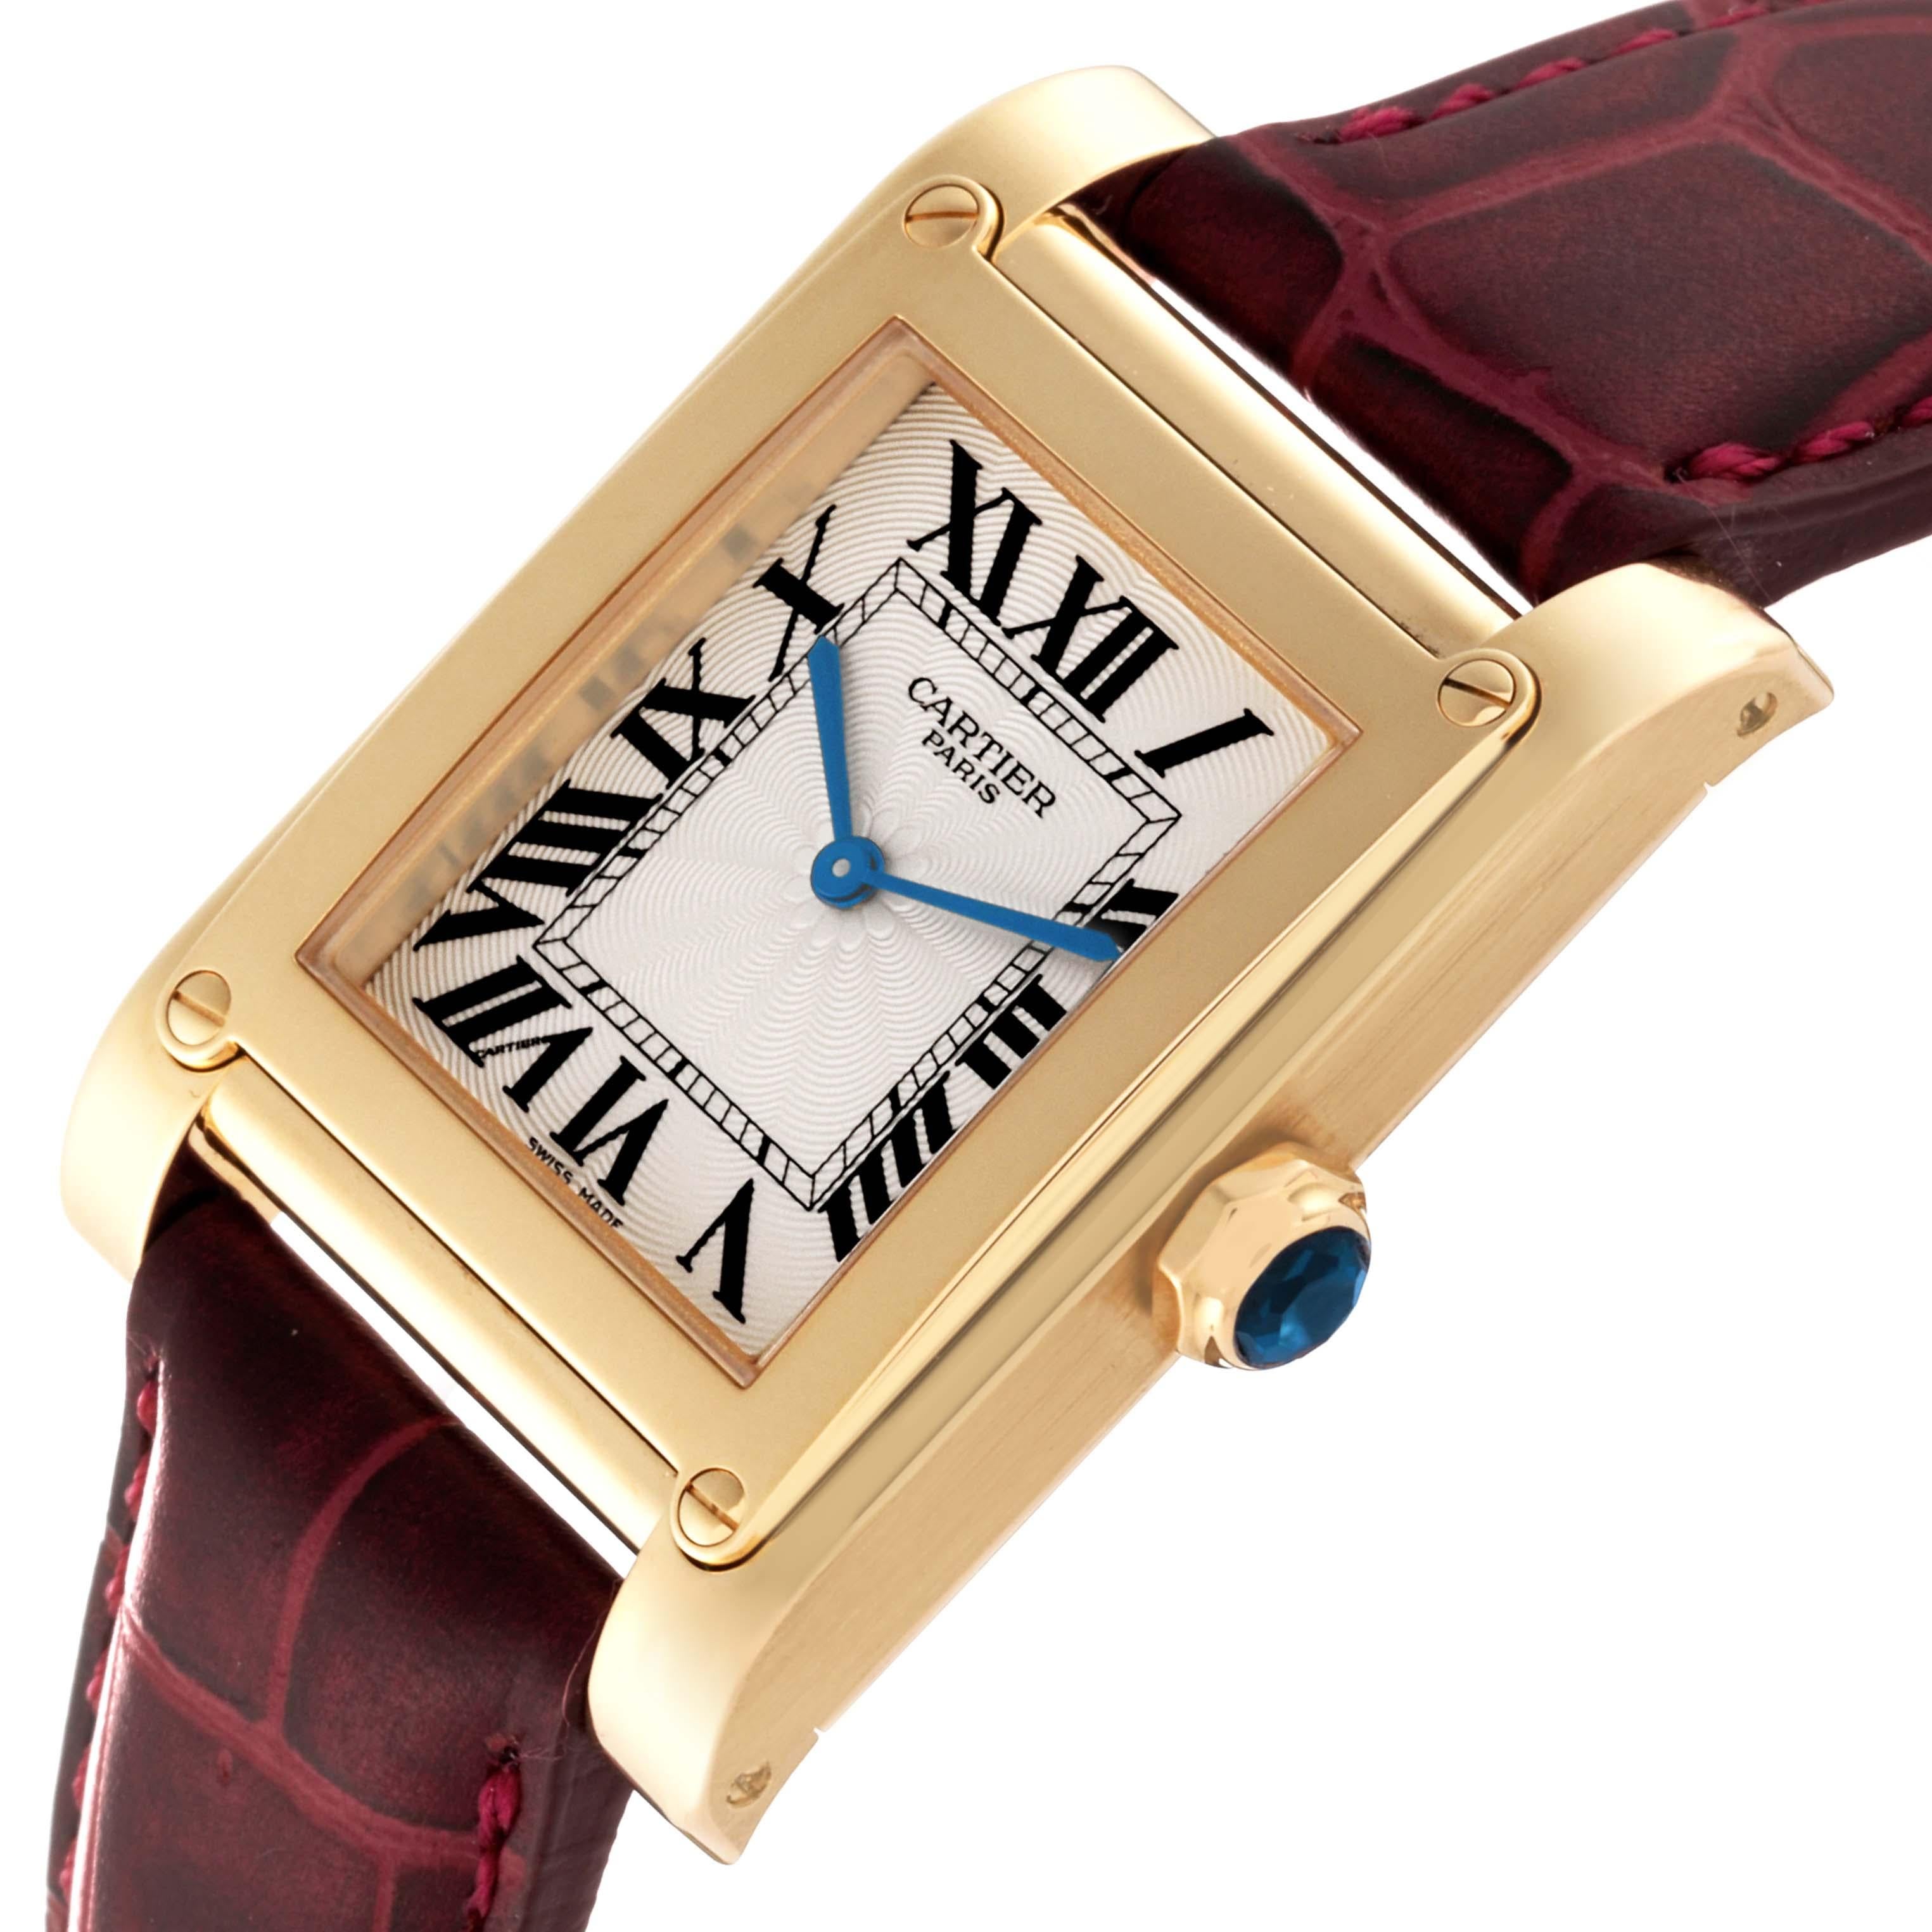 Cartier Tank a Vis Privee CPCP Collection Yellow Gold Mens Watch W1529451 For Sale 2